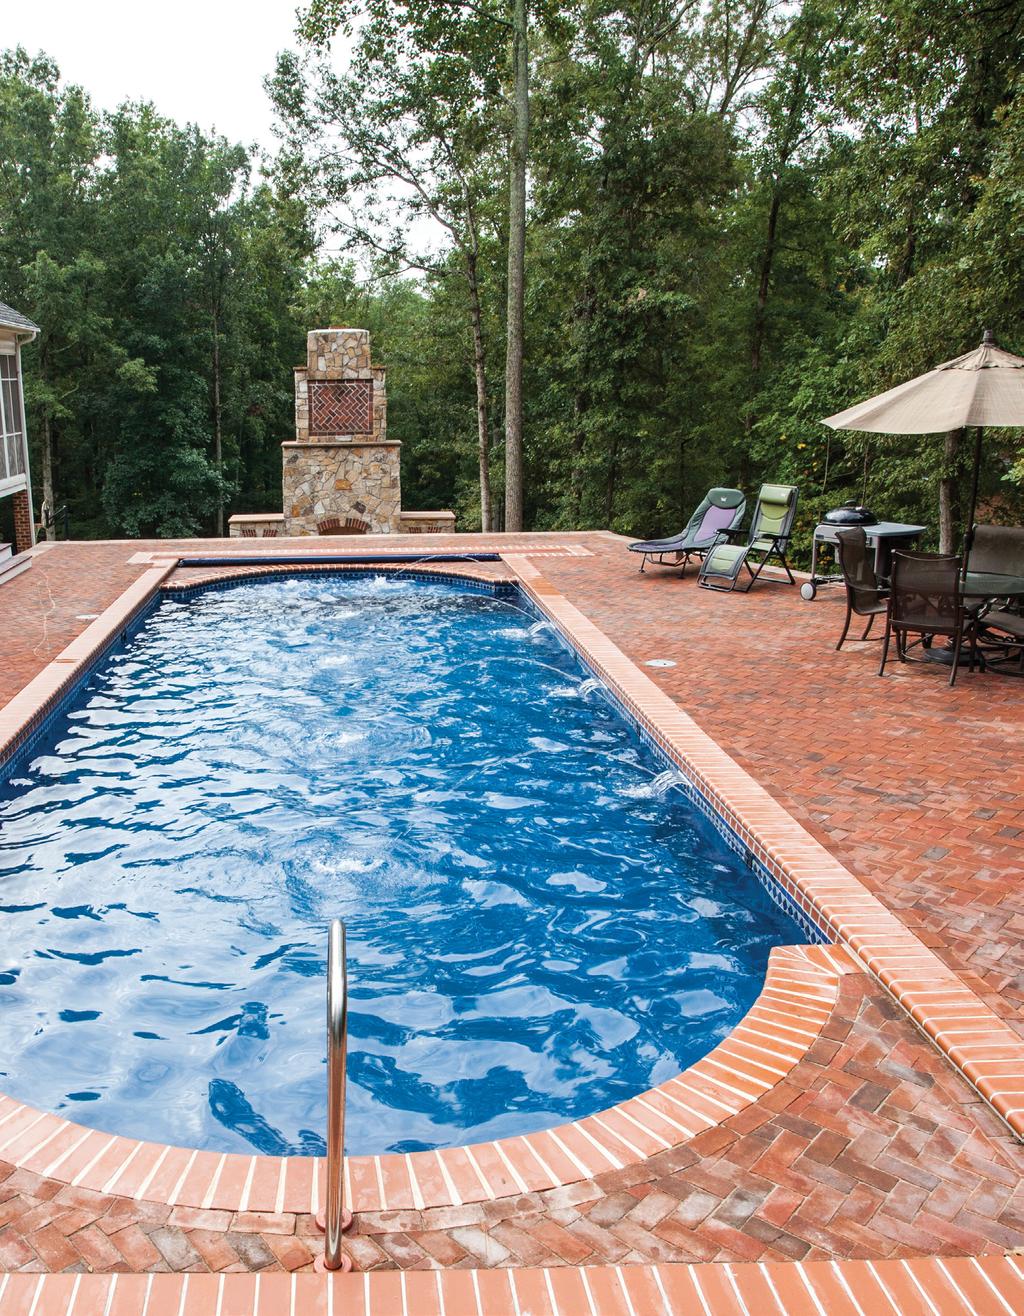 Myth #1: Fiberglass swimming pools pop out of the ground. This is the #1 myth aimed at fiberglass pools and it is simply not true.